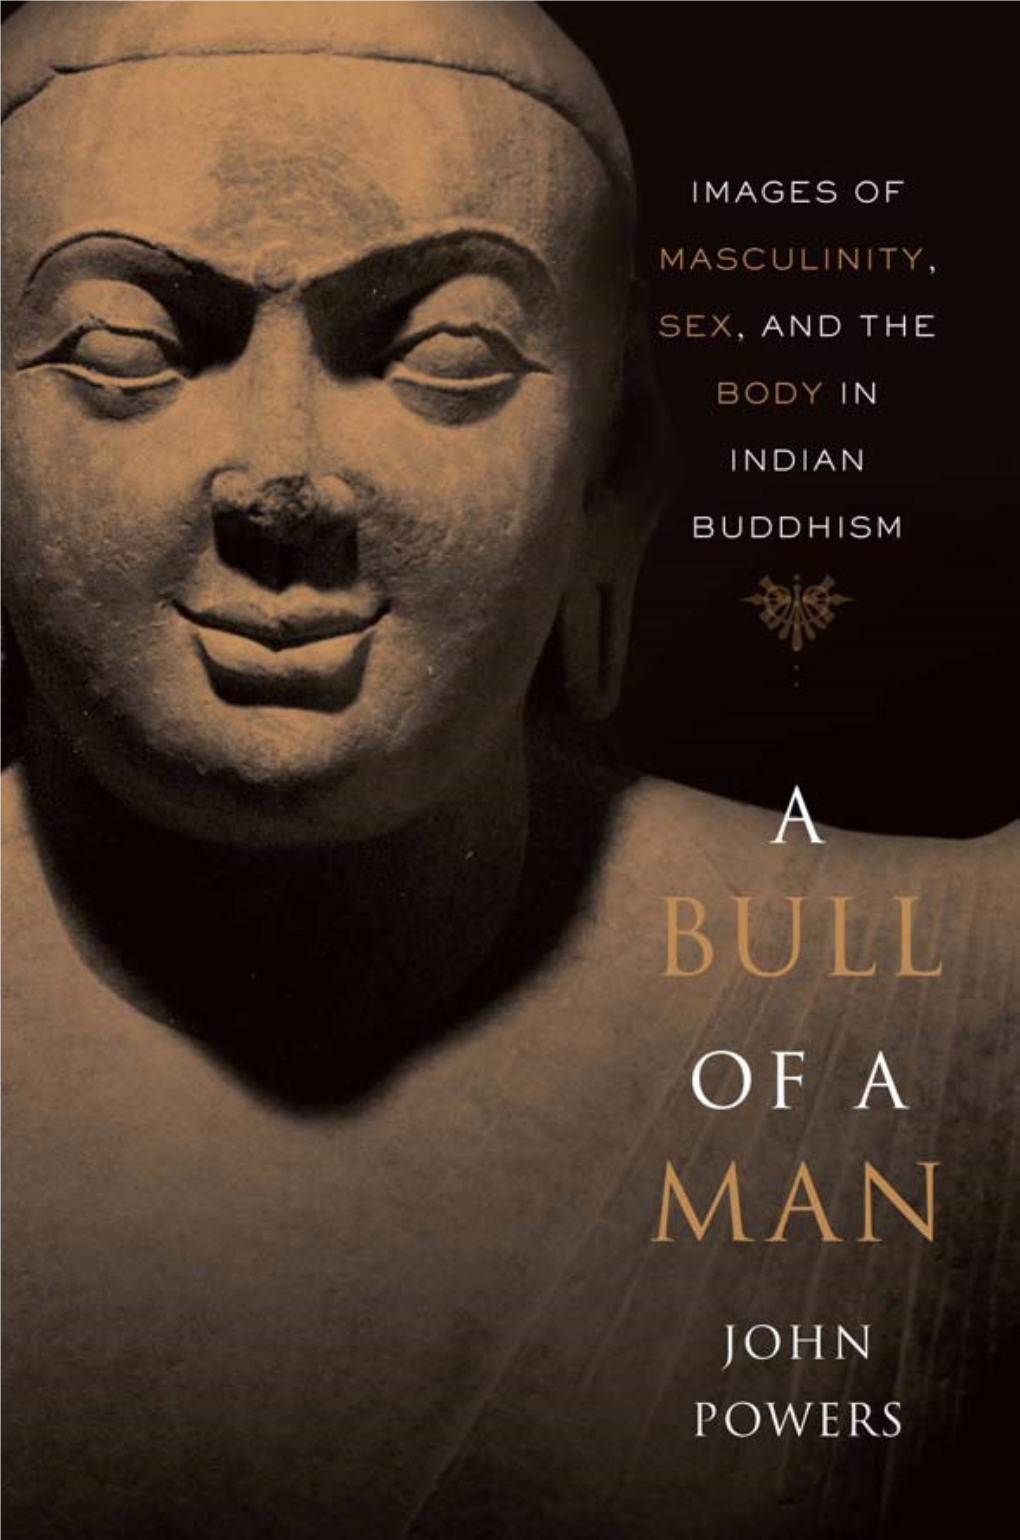 A Bull of a Man: Images of Masculinity, Sex, and the Body In